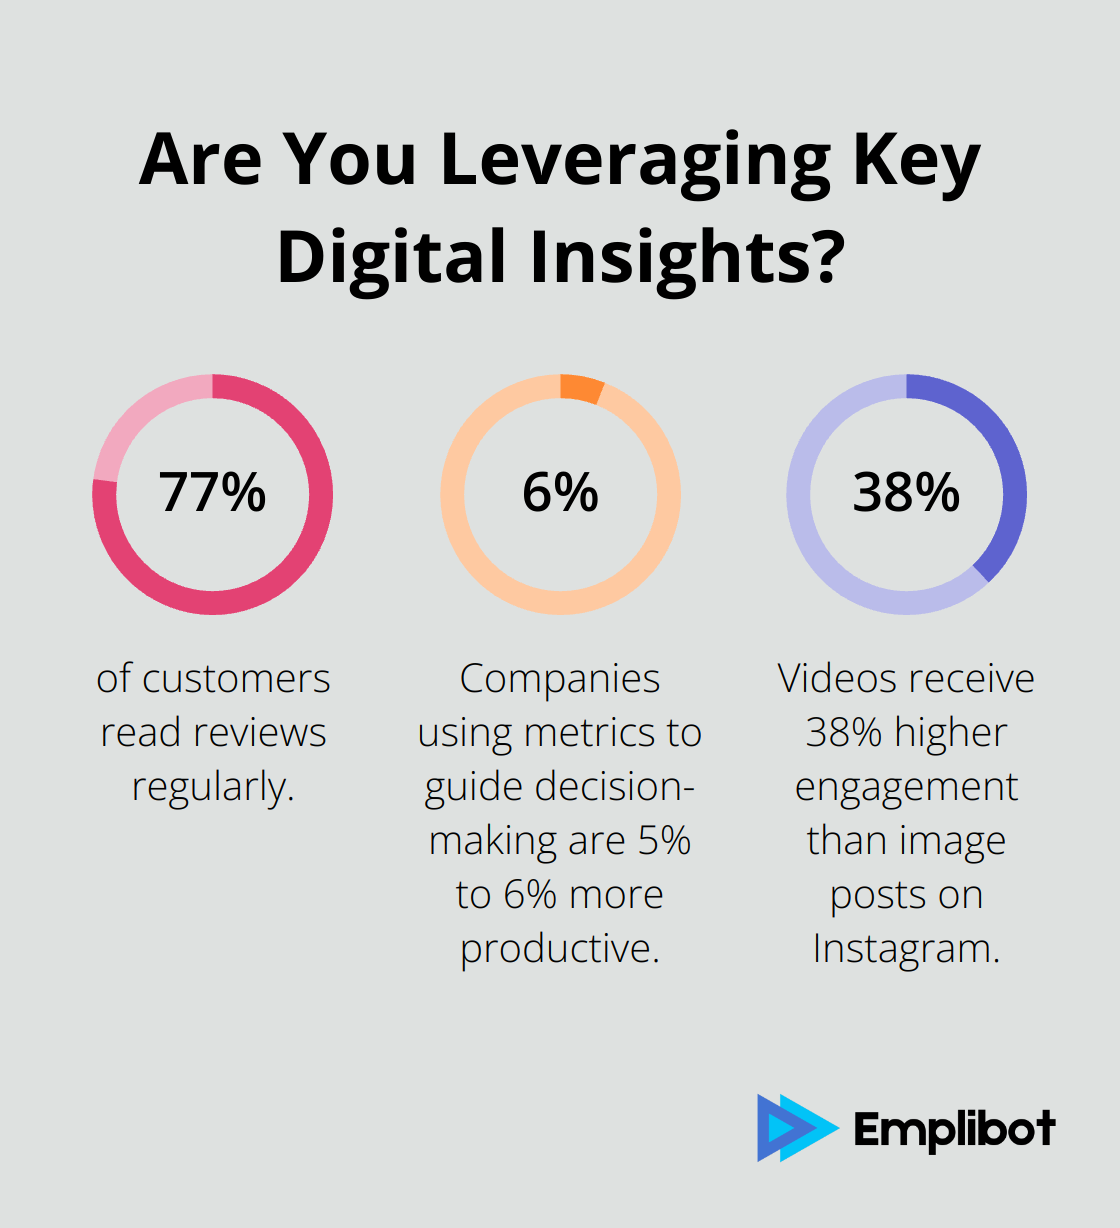 Fact - Are You Leveraging Key Digital Insights?